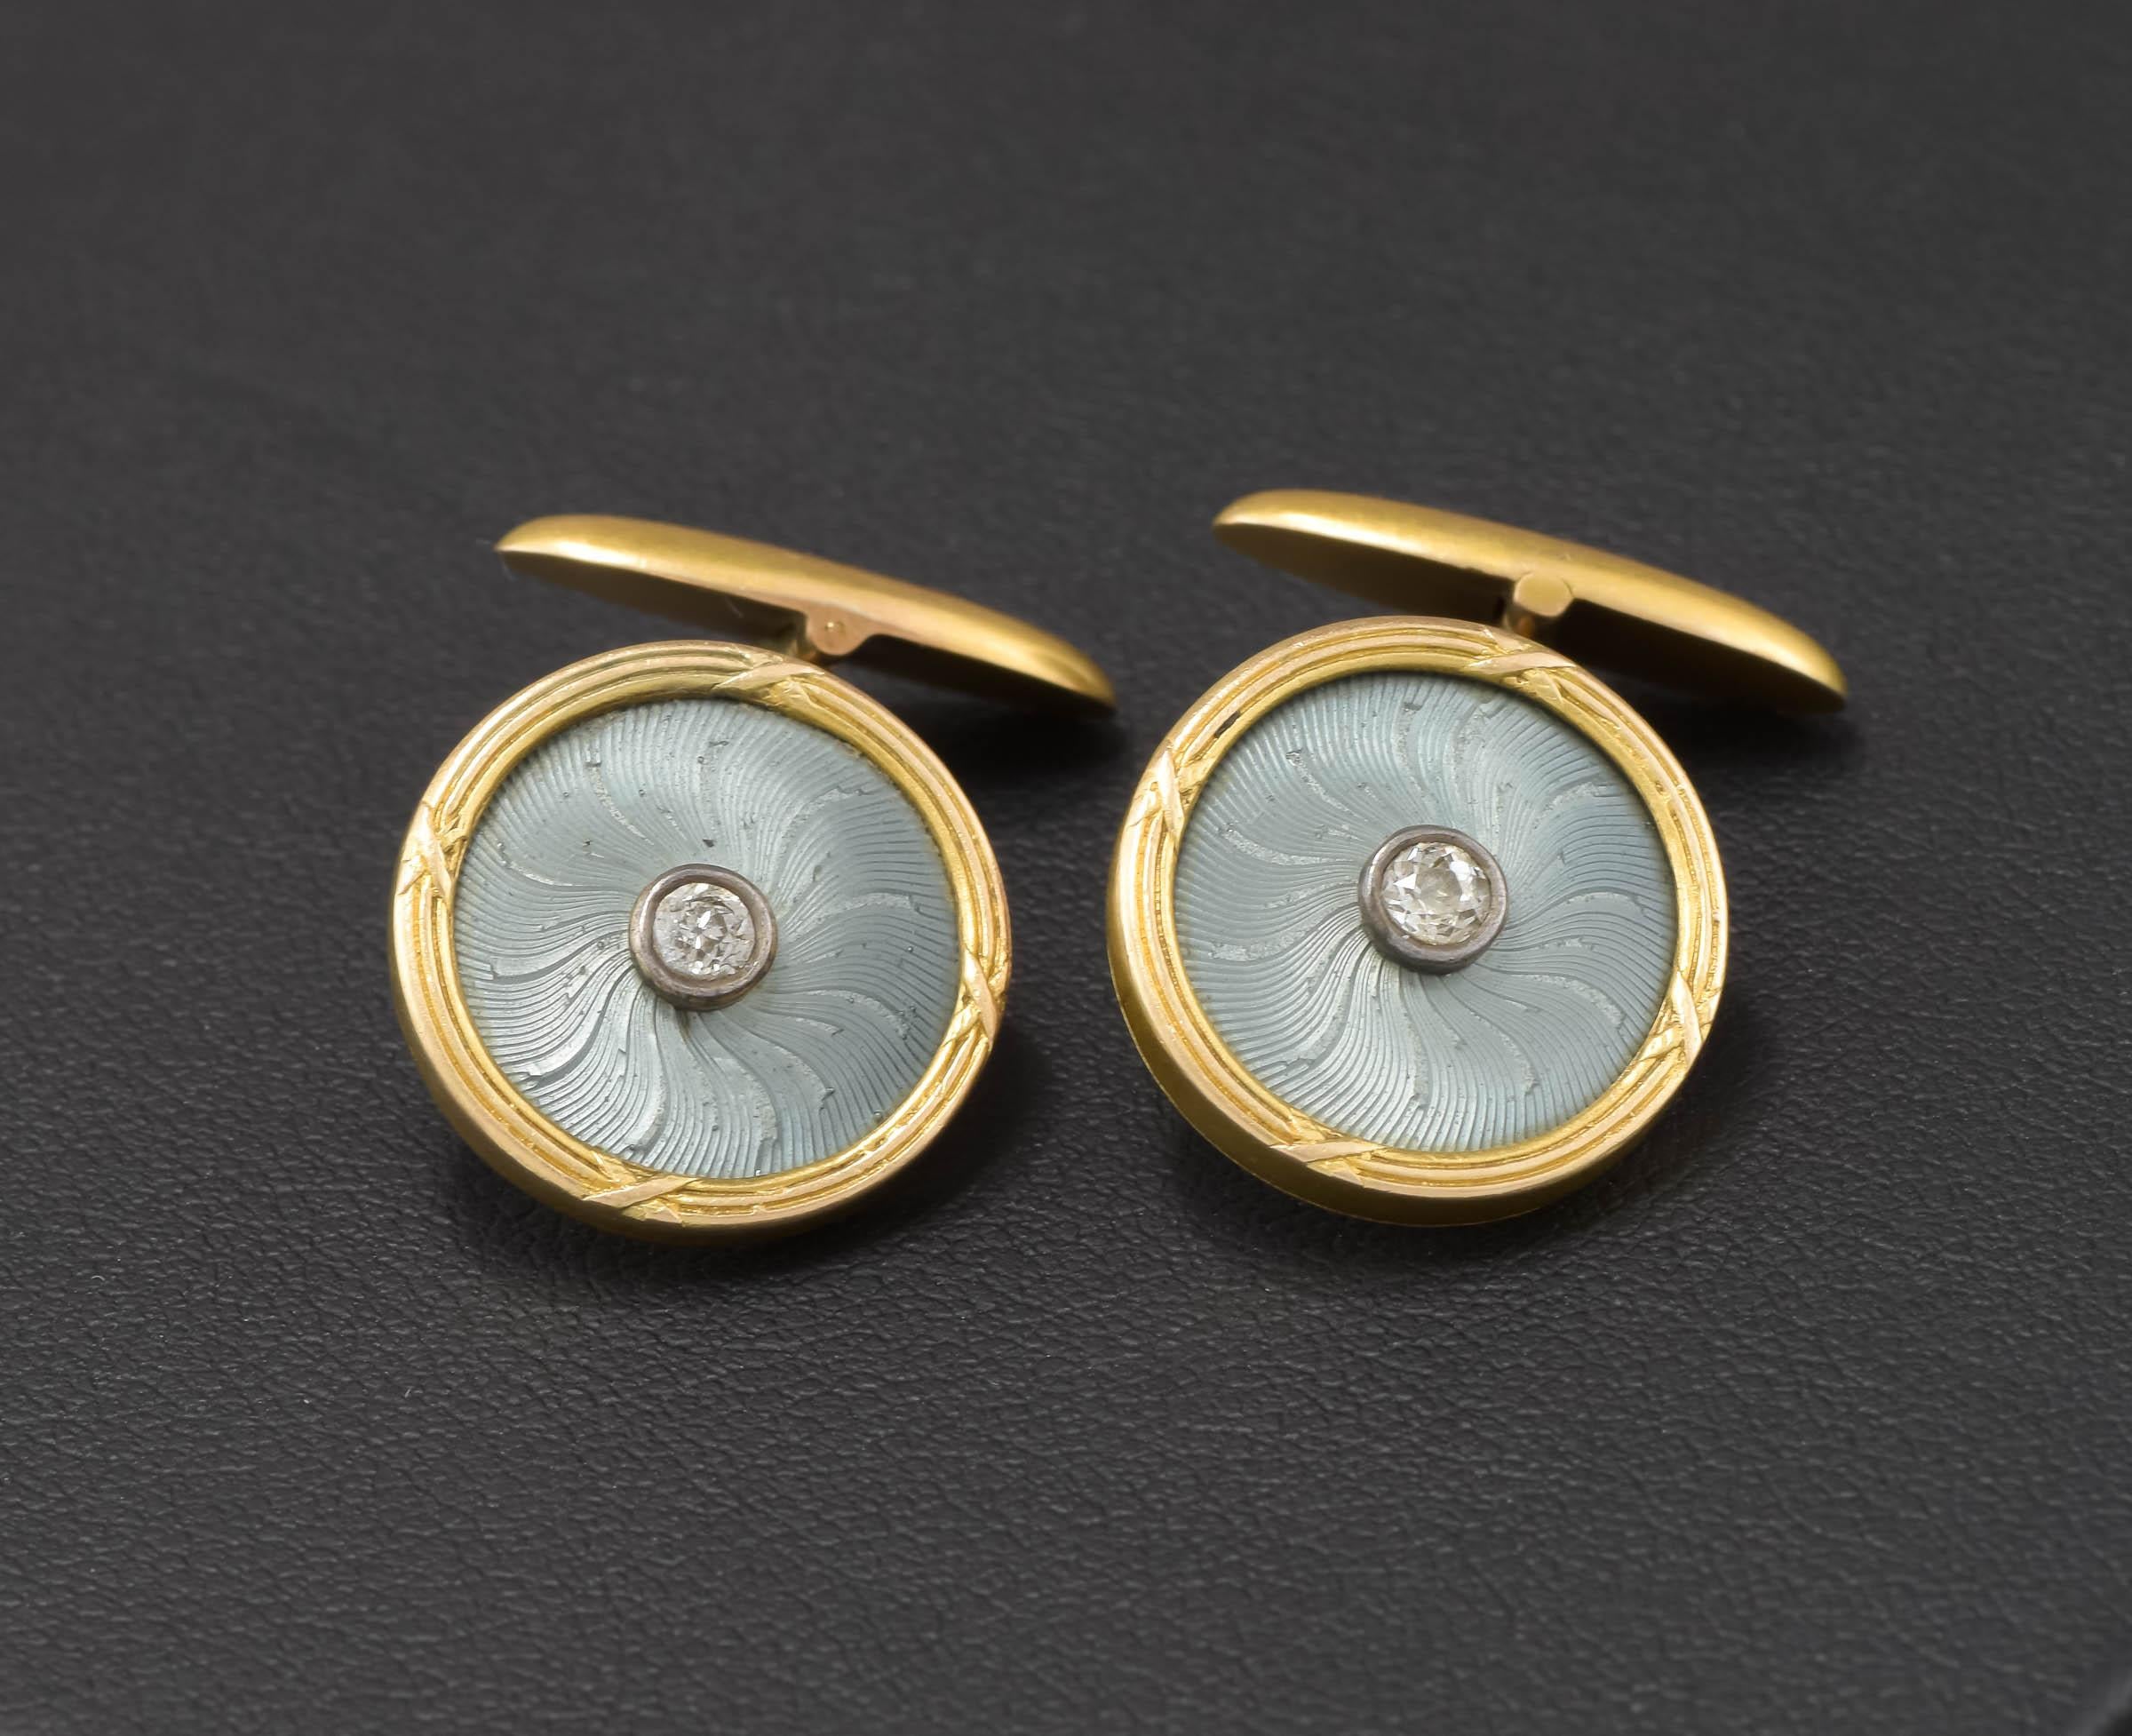 Offered is an elegant pair of Imperial Russian antique guilloche enamel cufflinks with fiery old European cut diamonds.  Fully hallmarked, they remain in wonderful condition.

The enamel has a particularly lovely color - a shimmery slate